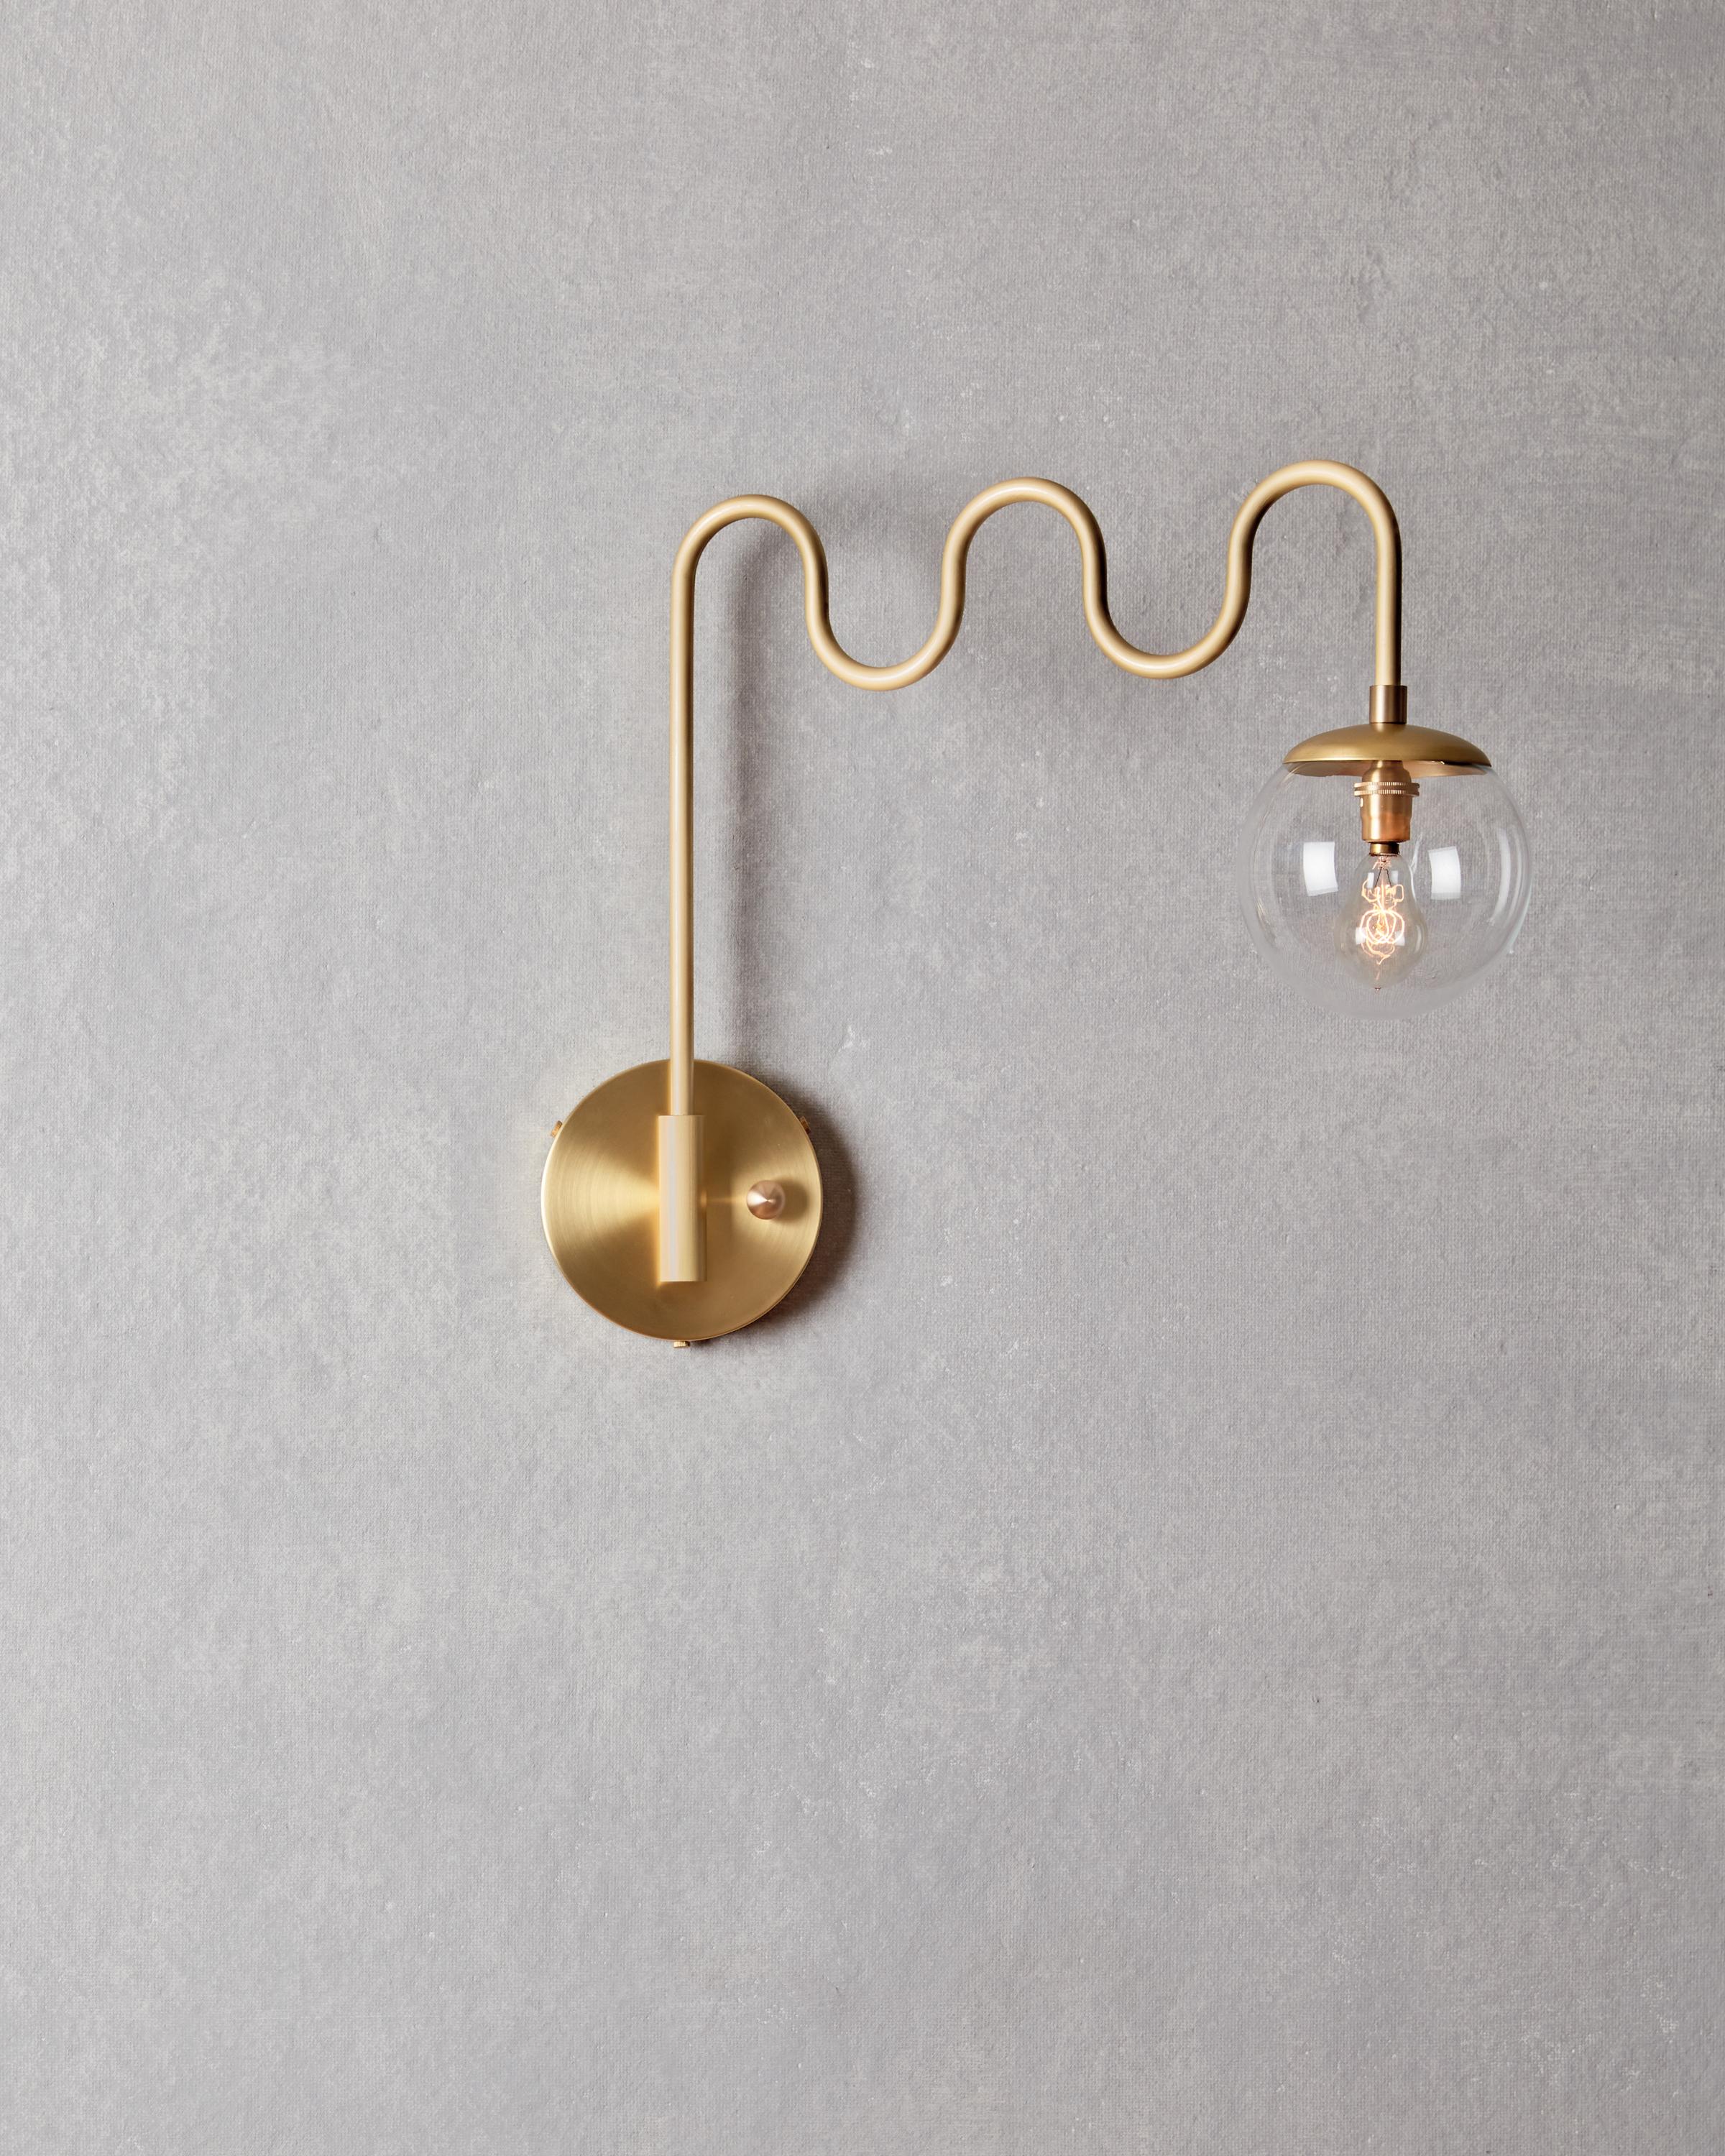 Form and function meet with the Cecil Sconce’s undulating bent brass arm and swiveling backplate. Choose either a milk glass globe for ambiance or a clear glass globe for maximum illumination. 

OVERALL DIMENSIONS
17.75